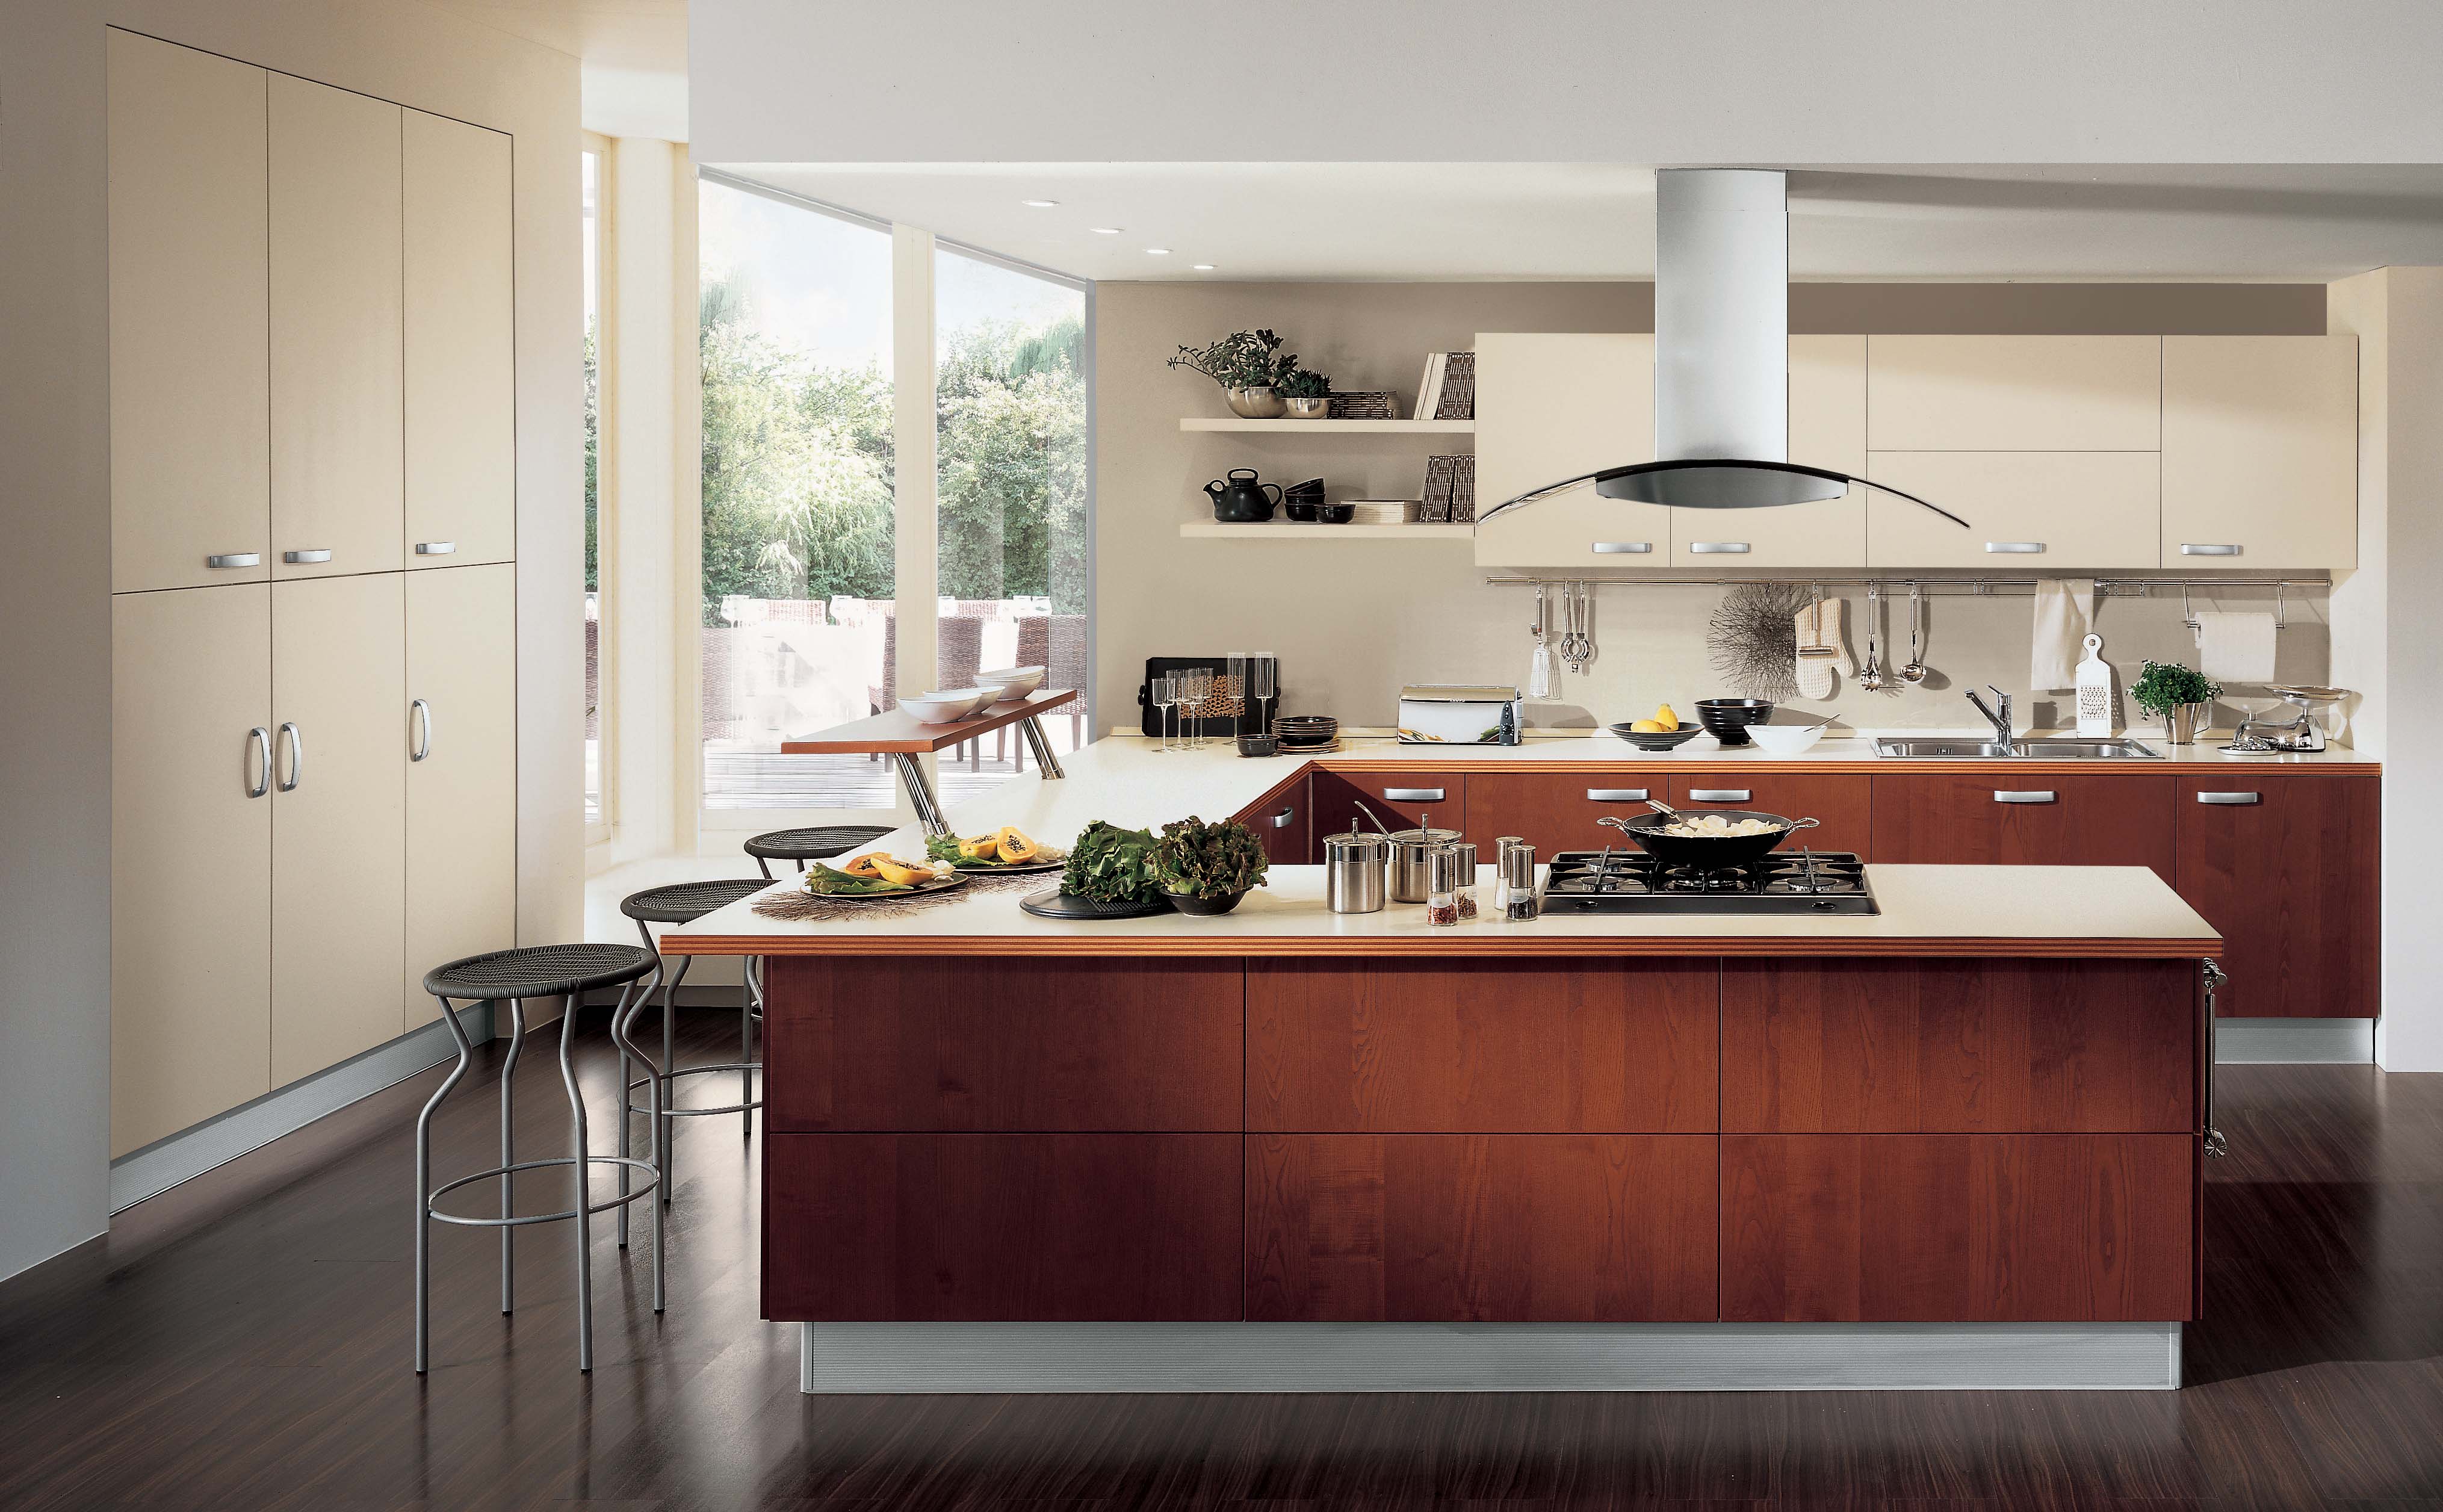 35 Kitchen Design For Your Home